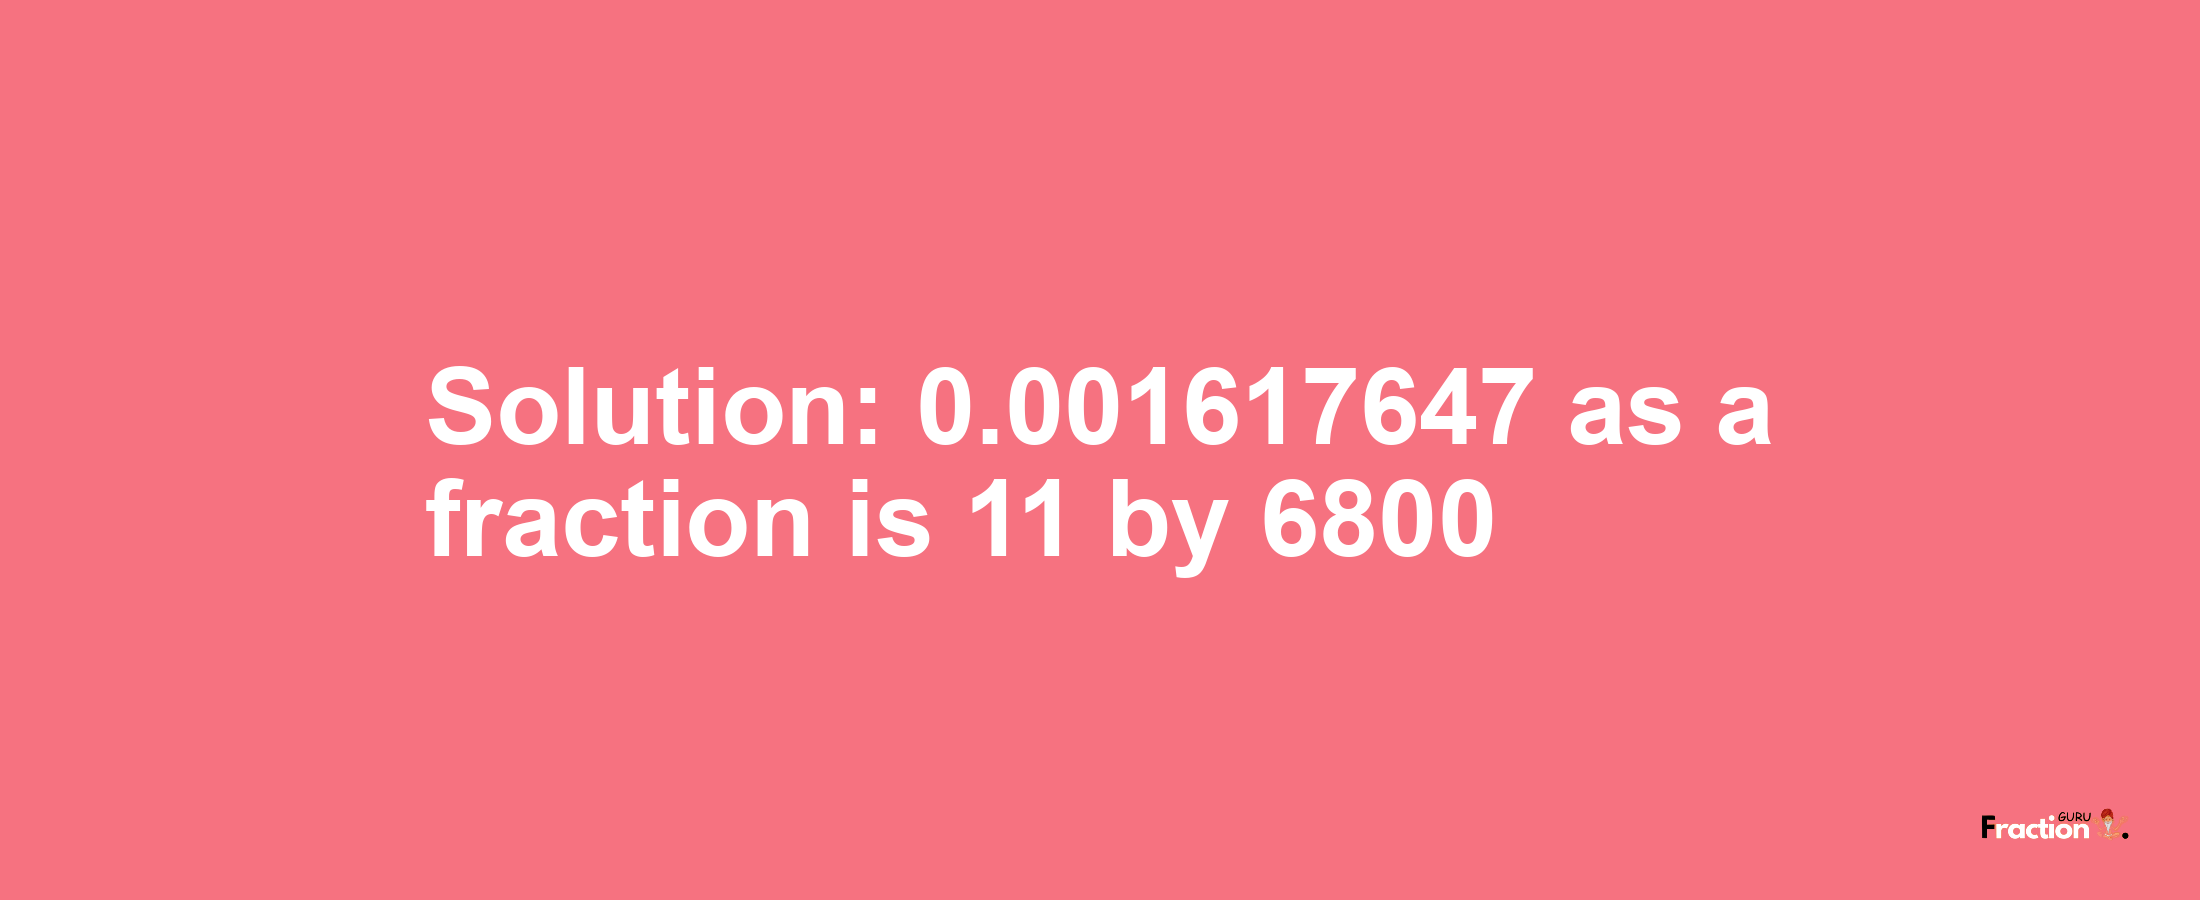 Solution:0.001617647 as a fraction is 11/6800